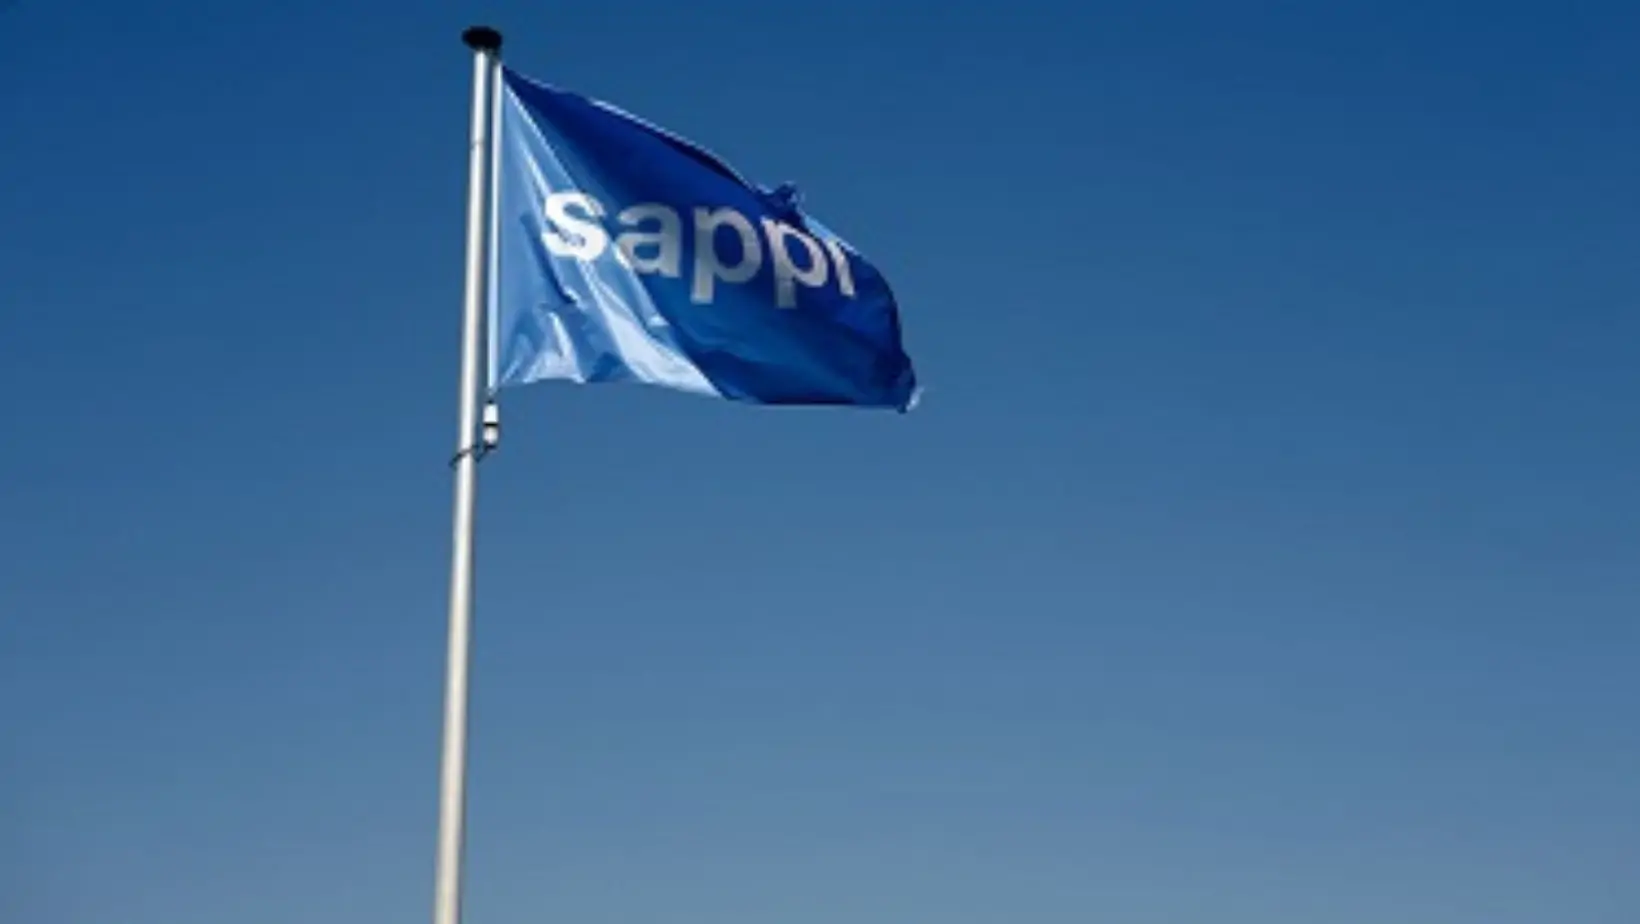 Sappi Southern Africa’s Partial Capital Reduction